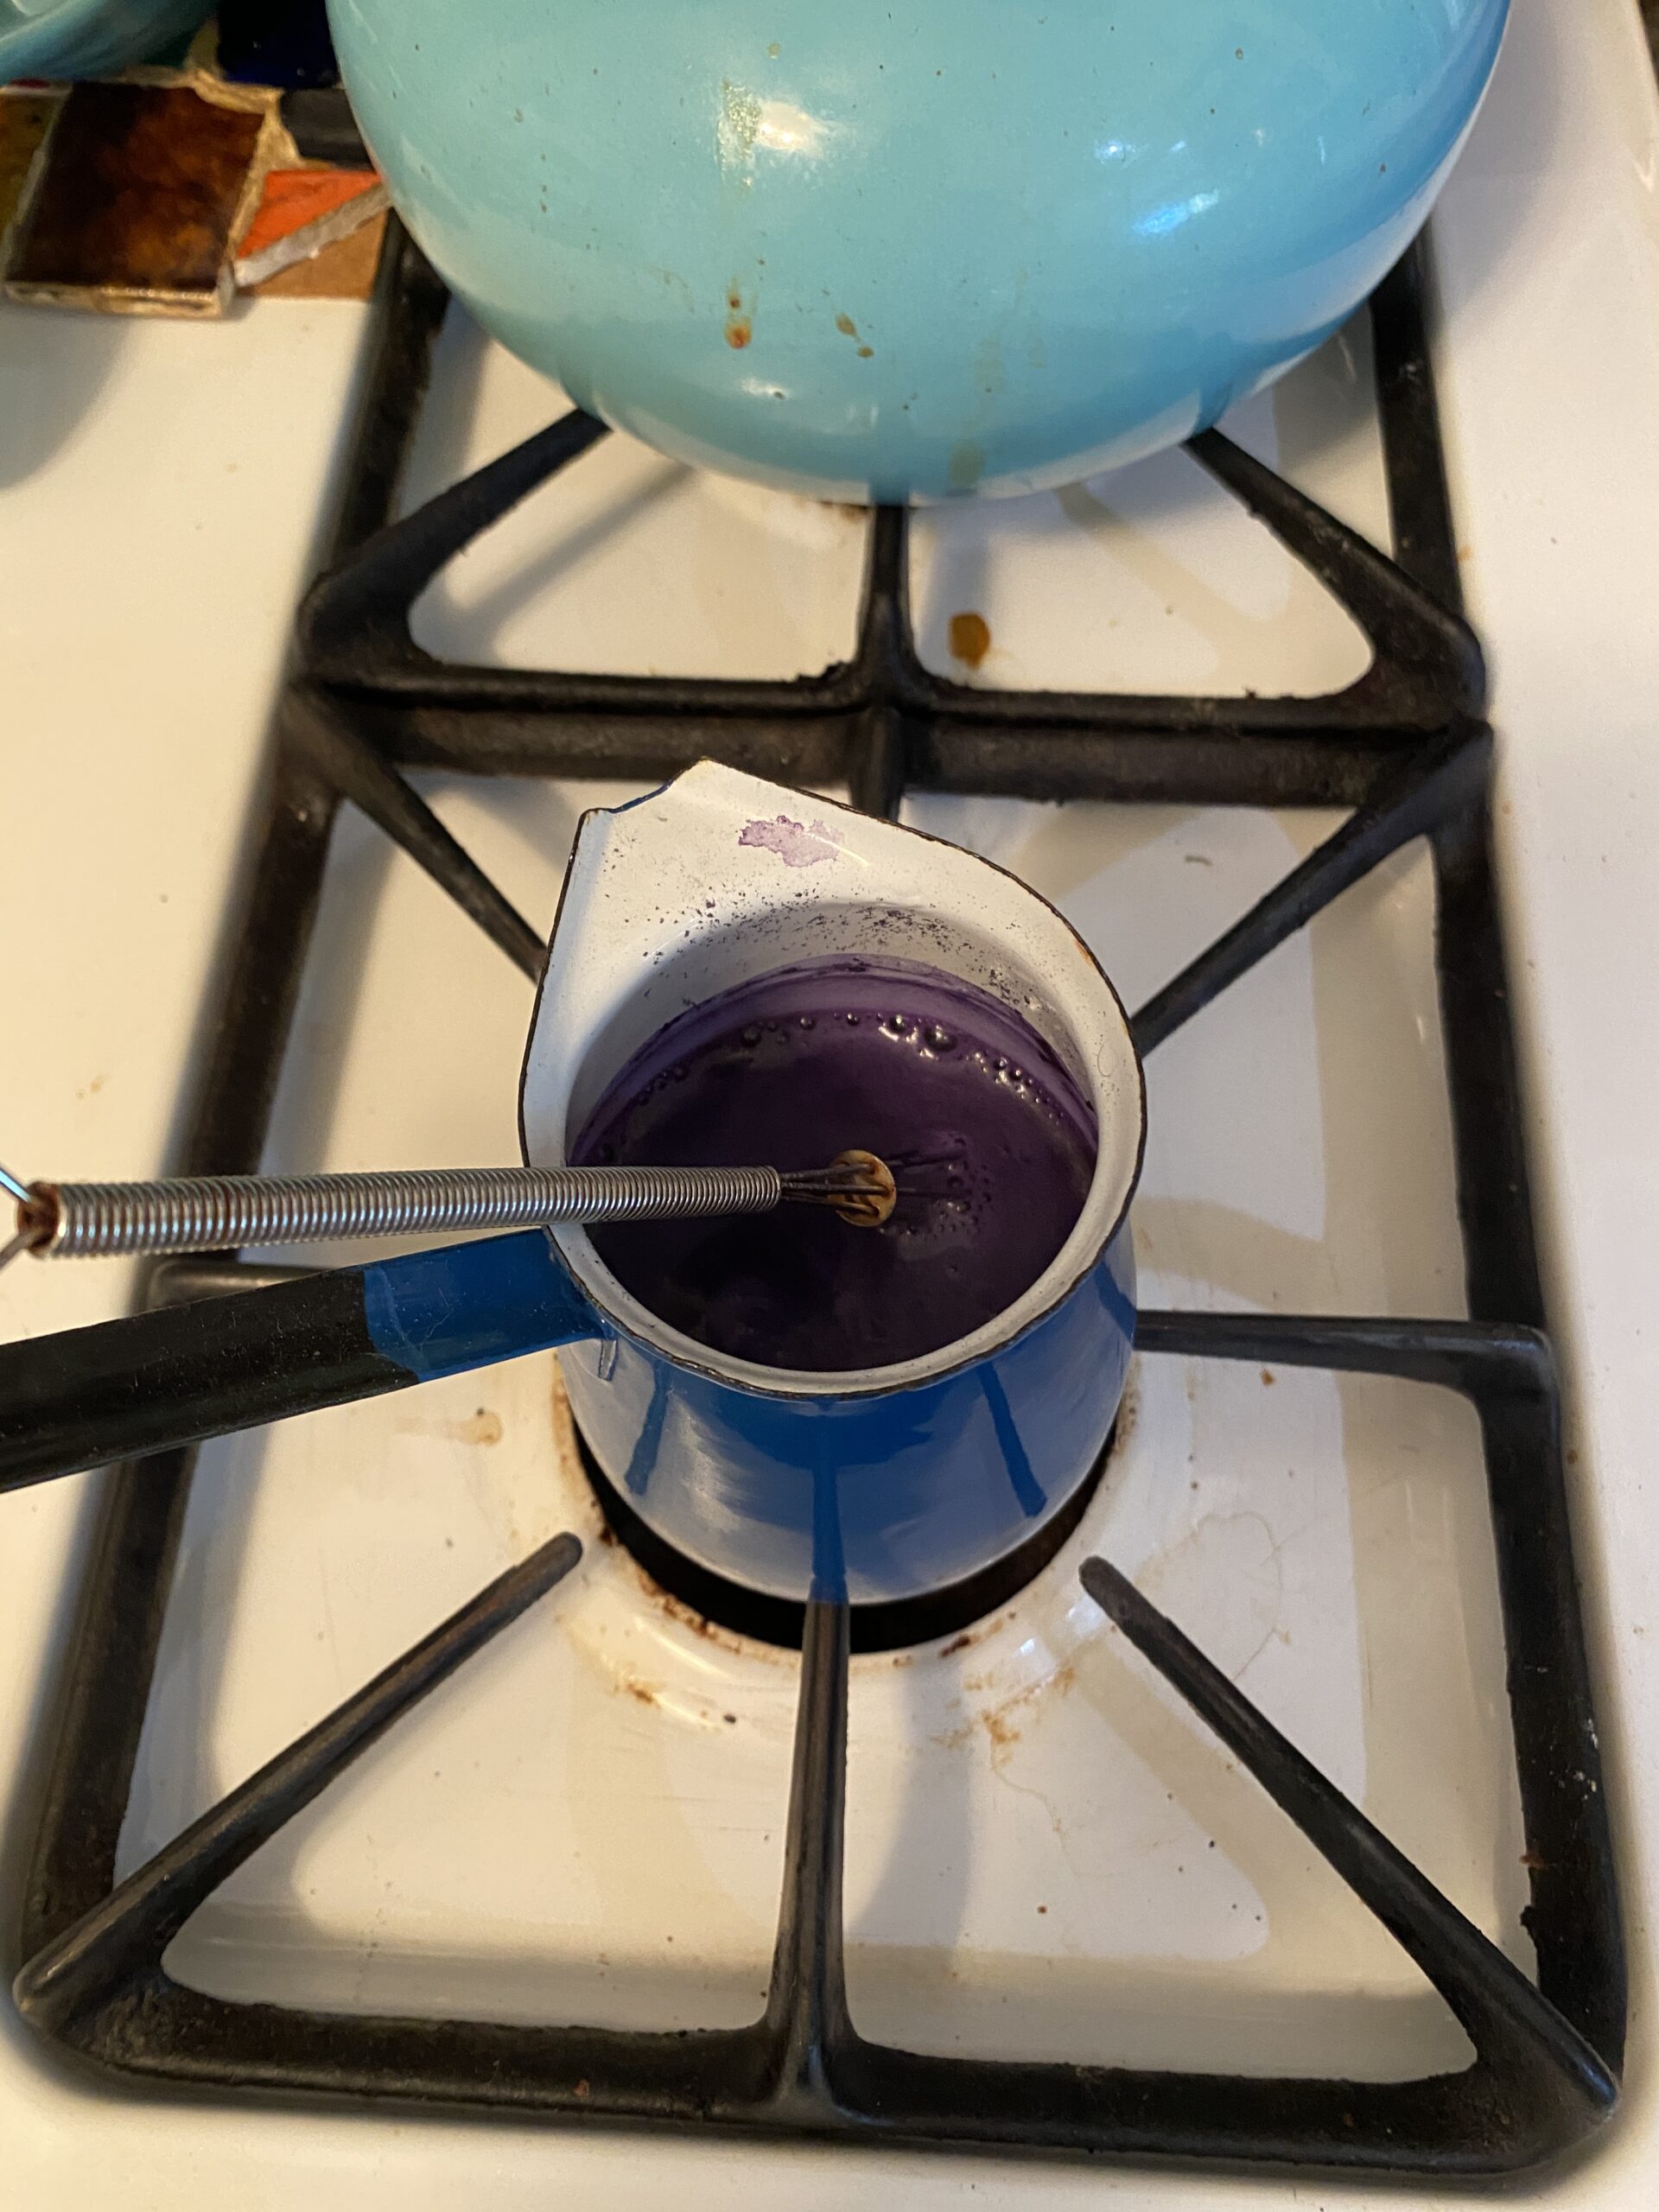 Butterfly Pea Flower Syrup